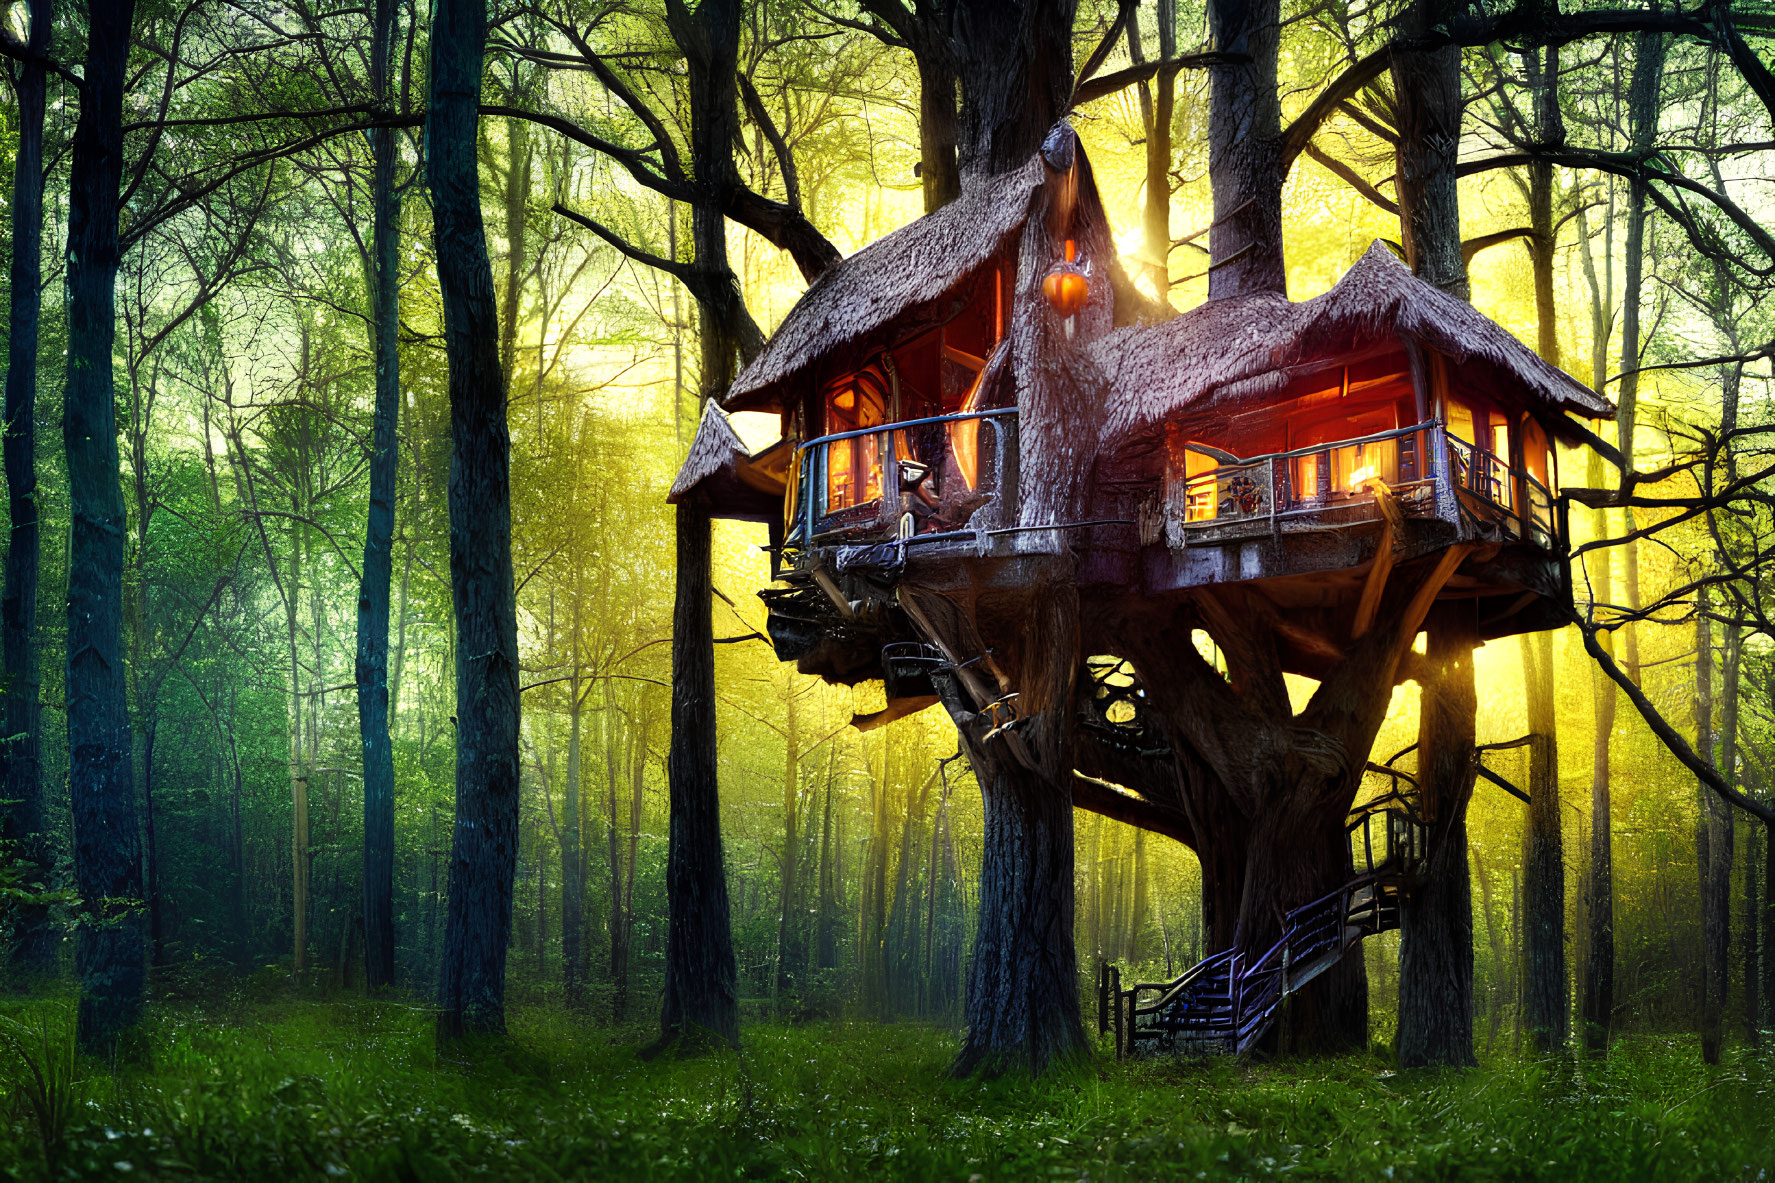 Cozy treehouse with thatched roof in forest setting